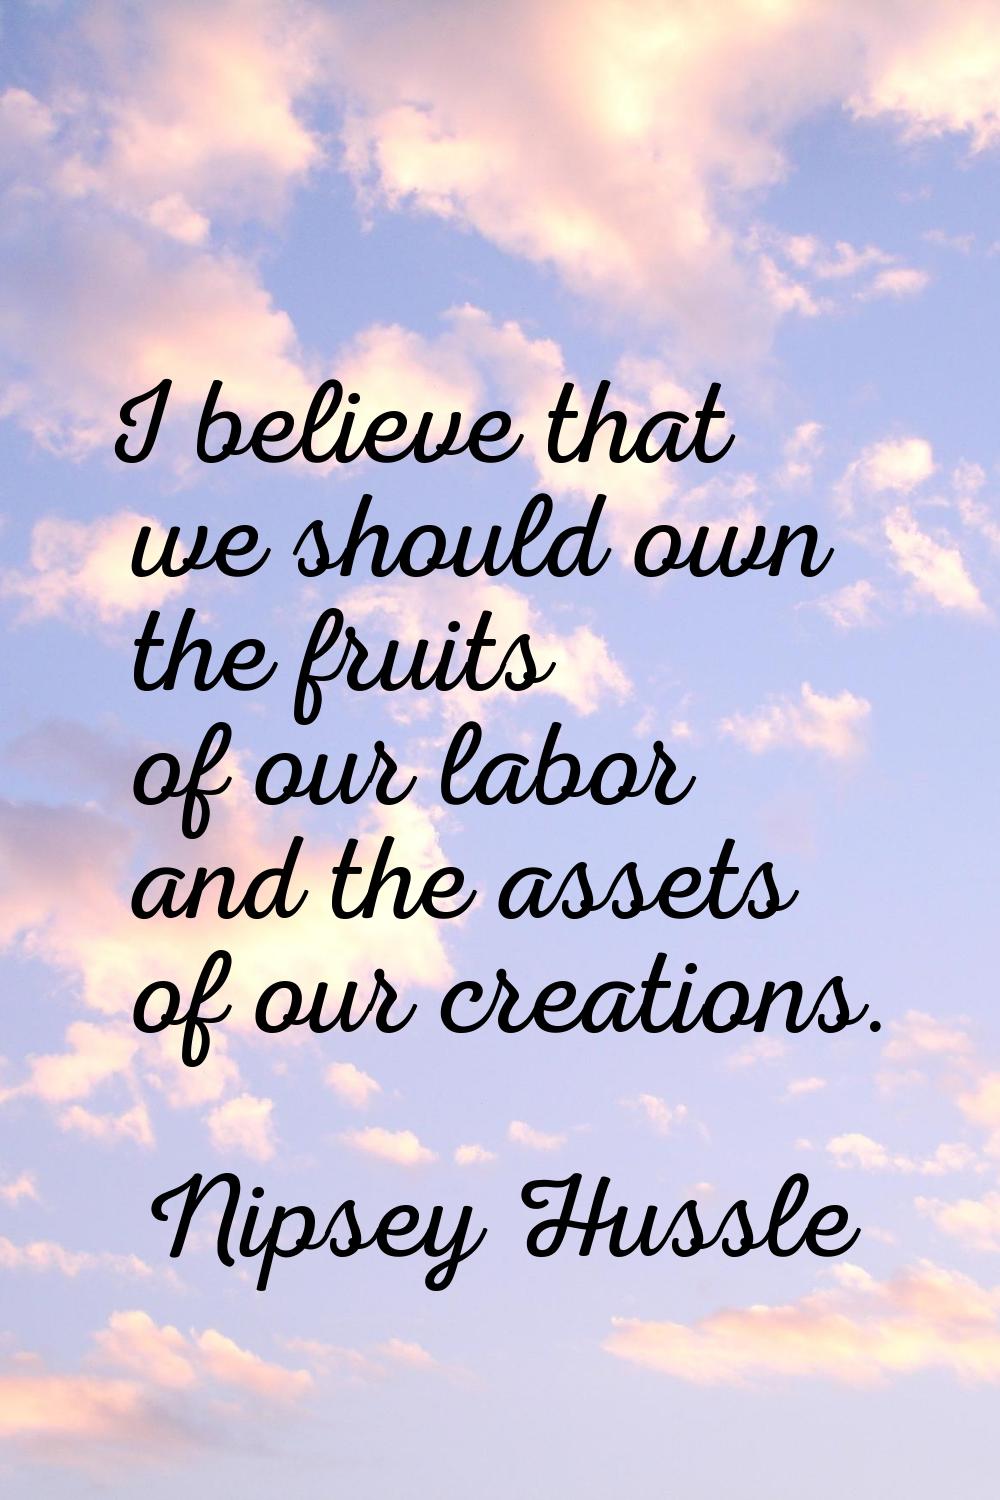 I believe that we should own the fruits of our labor and the assets of our creations.